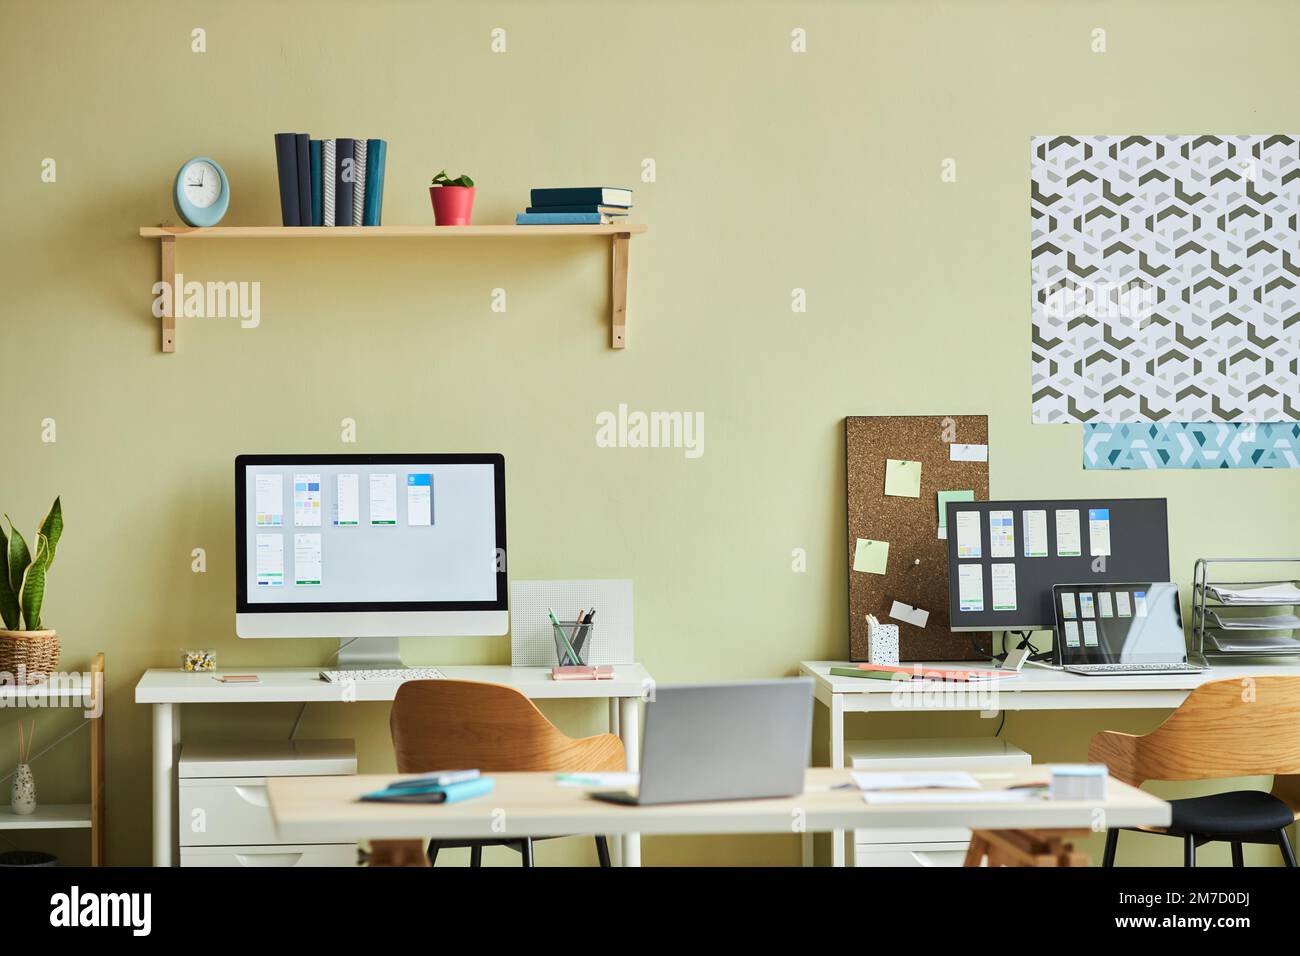 Background image of minimal office interior with computers on desks and pastel yellow wall, copy space Stock Photo